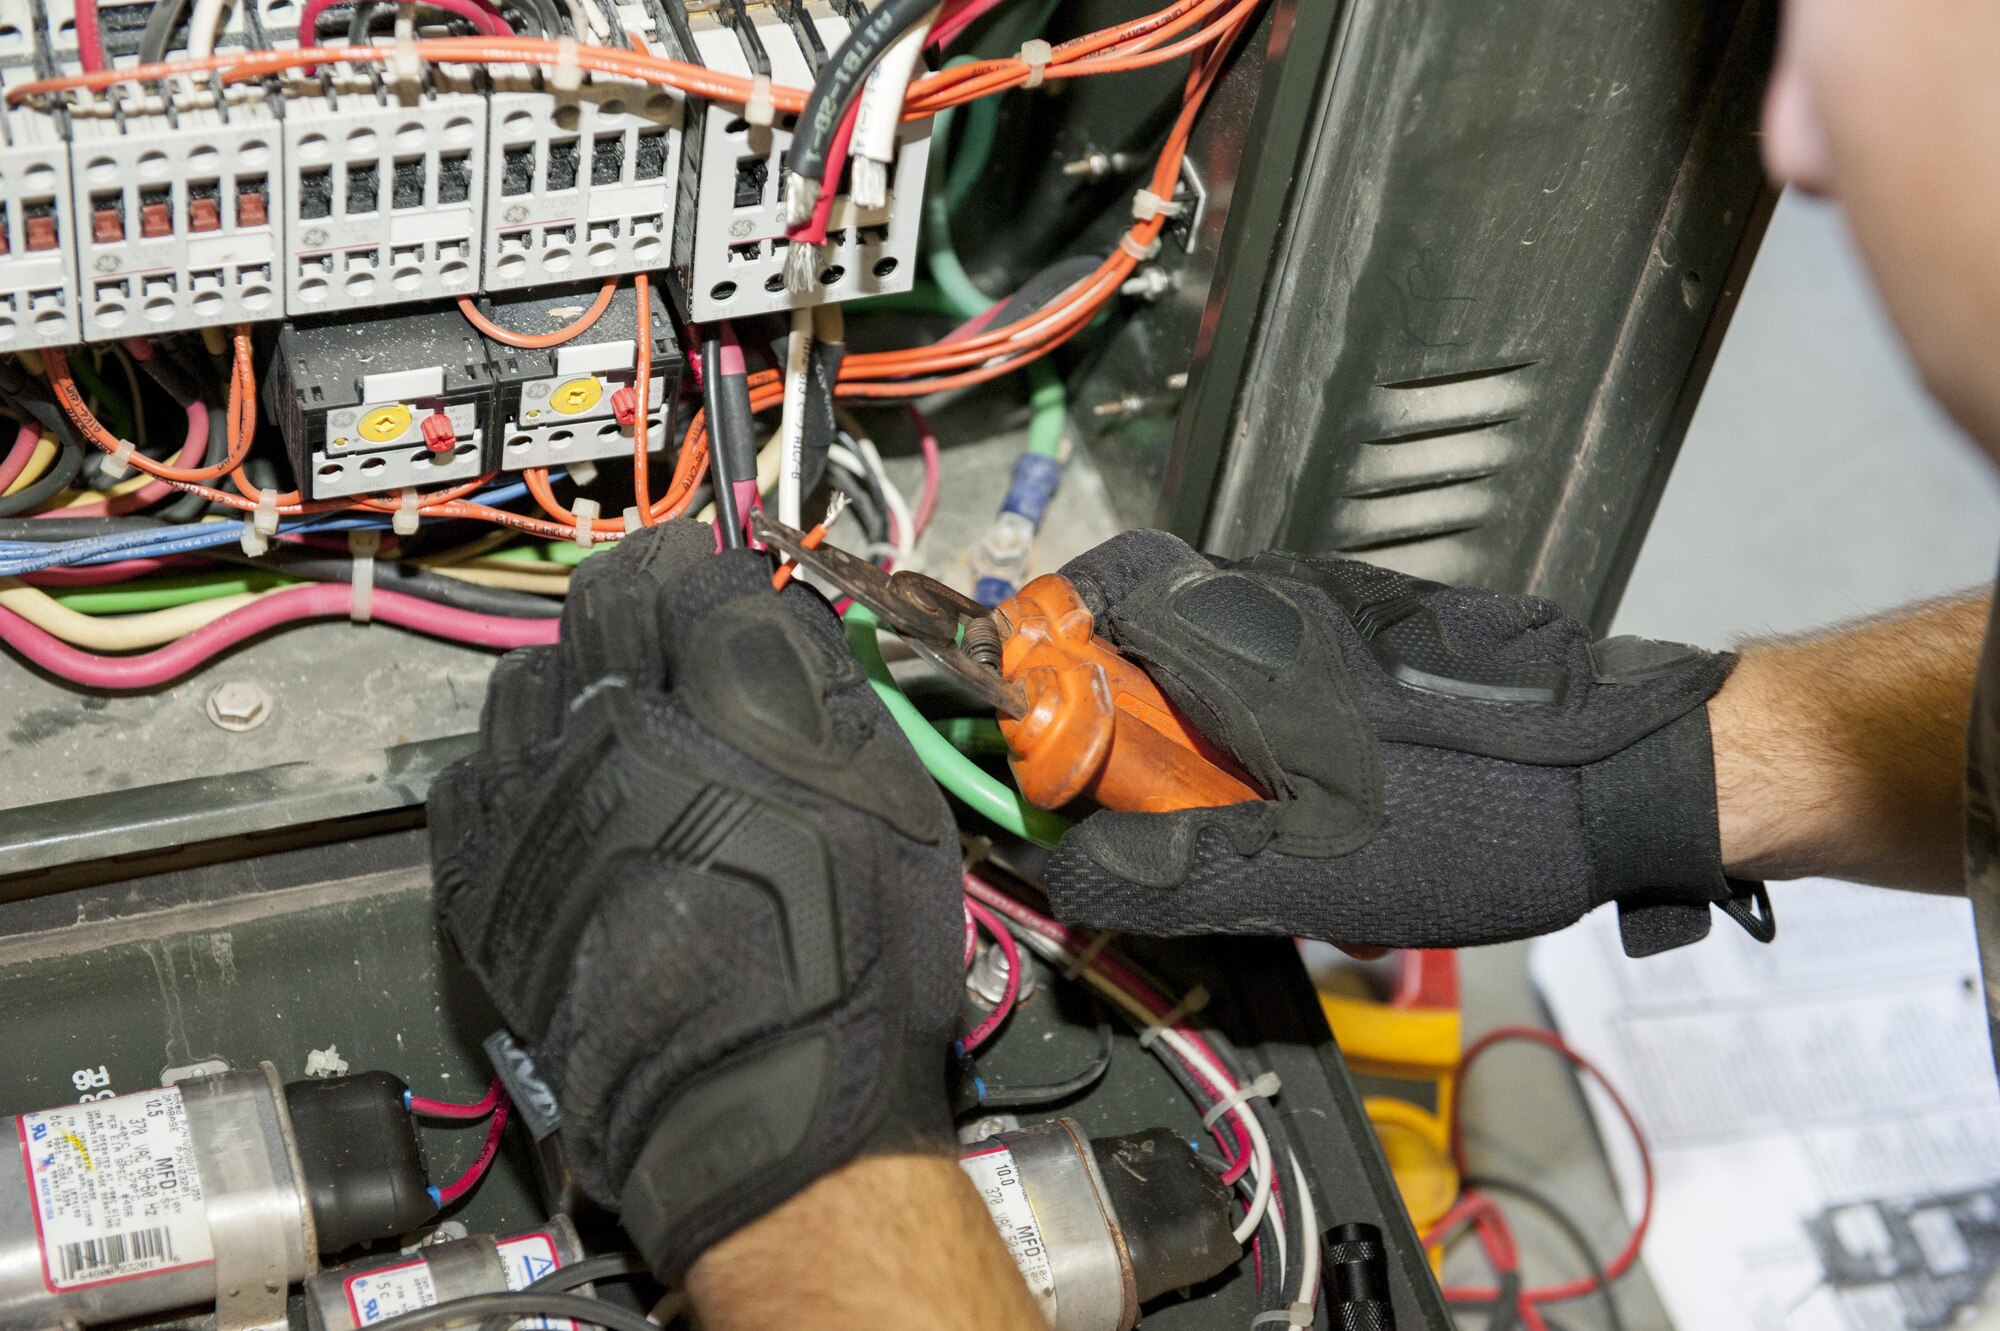 U.S. Air Force Senior Airman Todd Gonsalves, 786th Civil Engineer Squadron heating, ventilation and air conditioning journeyman, uses a wire stripper to remove the protective coating from electrical wires while repairing an air conditioning unit July 28, 2016, at Incirlik Air Base, Turkey. Gonsalves came to Incirlik Air Base on temporary duty to augment and support the continuous operations supporting Operation Inherent Resolve. (U.S. Air Force photo by Staff Sgt. Jack Sanders)